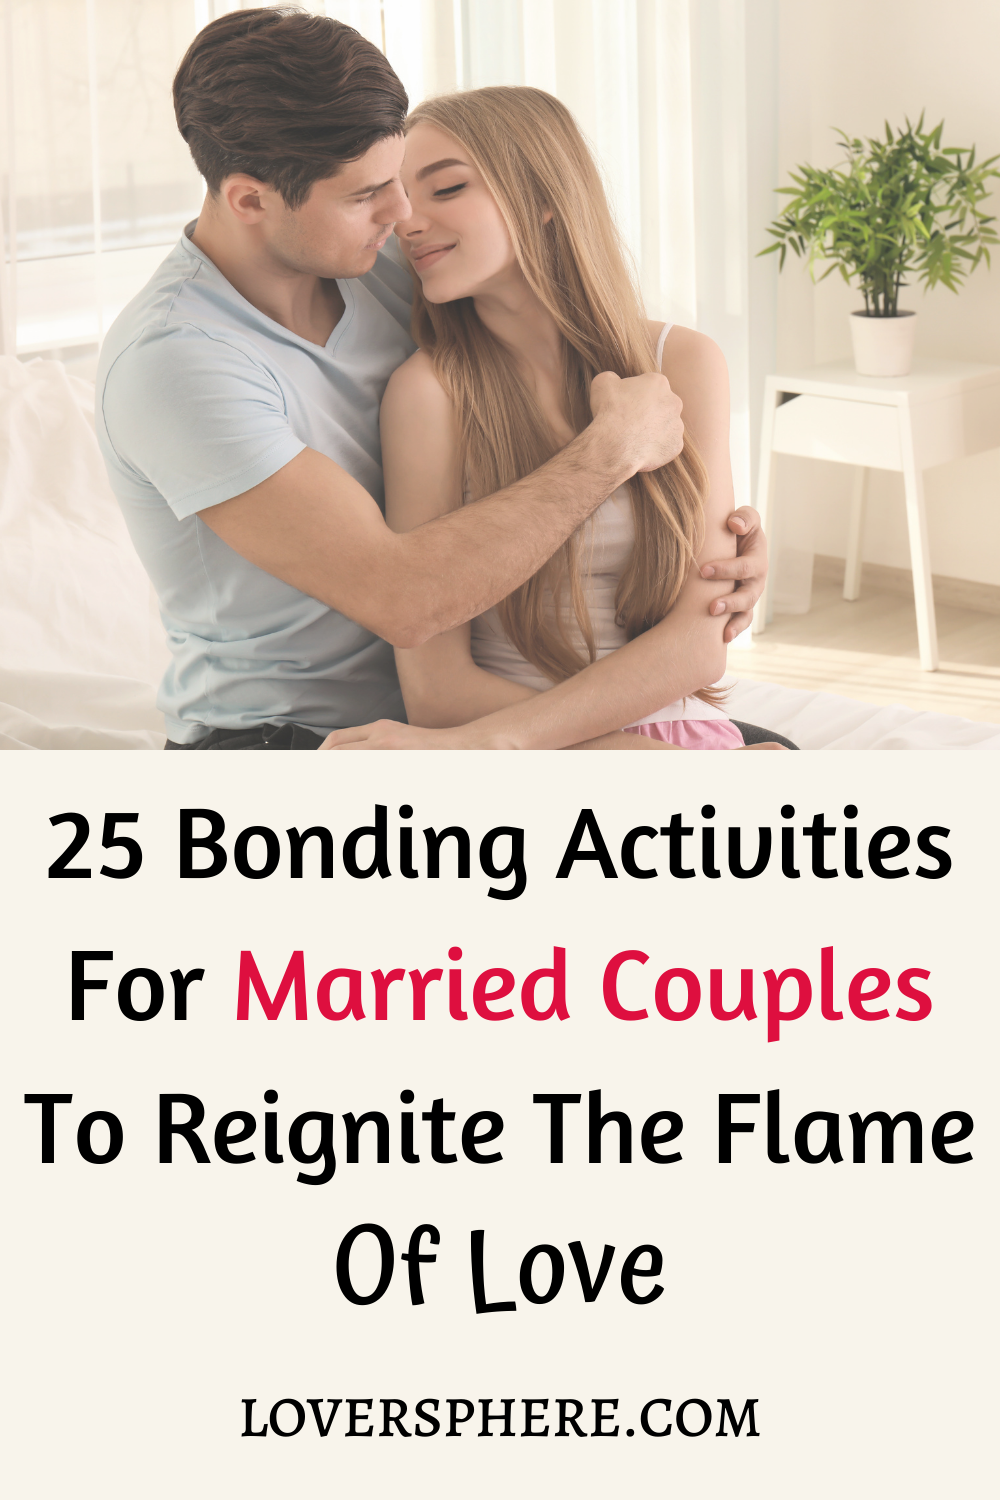 The Ultimate 25 Bonding Activities For Married Couples